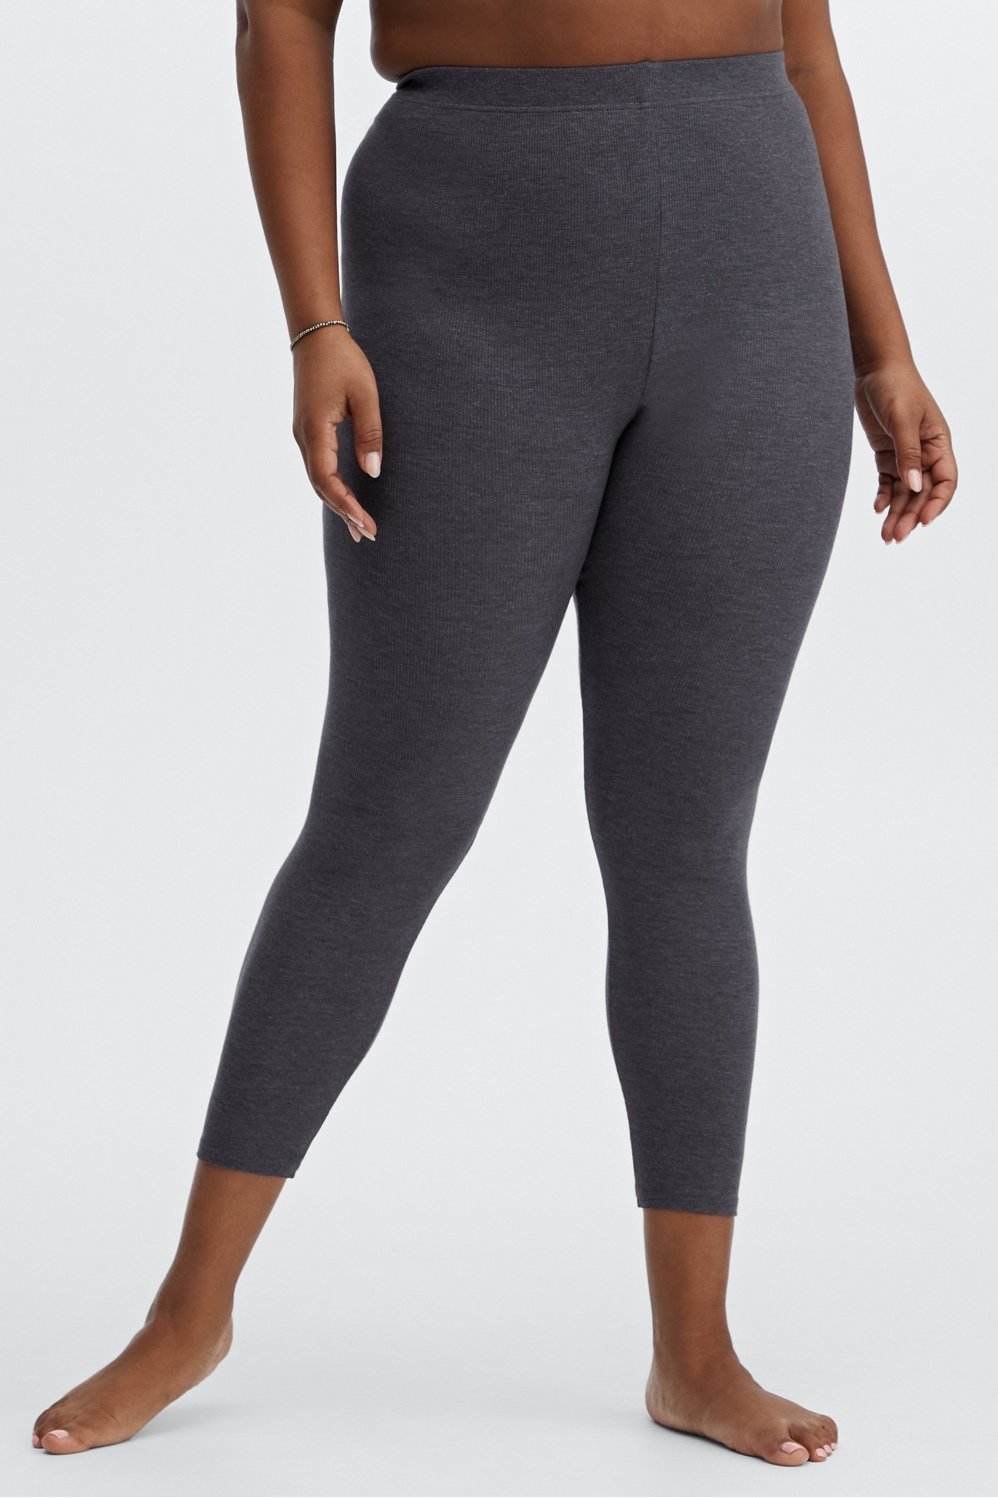 Fabletics On-the-Go Ultra High-Waisted 7/8 Legging Womens plus Size 4X